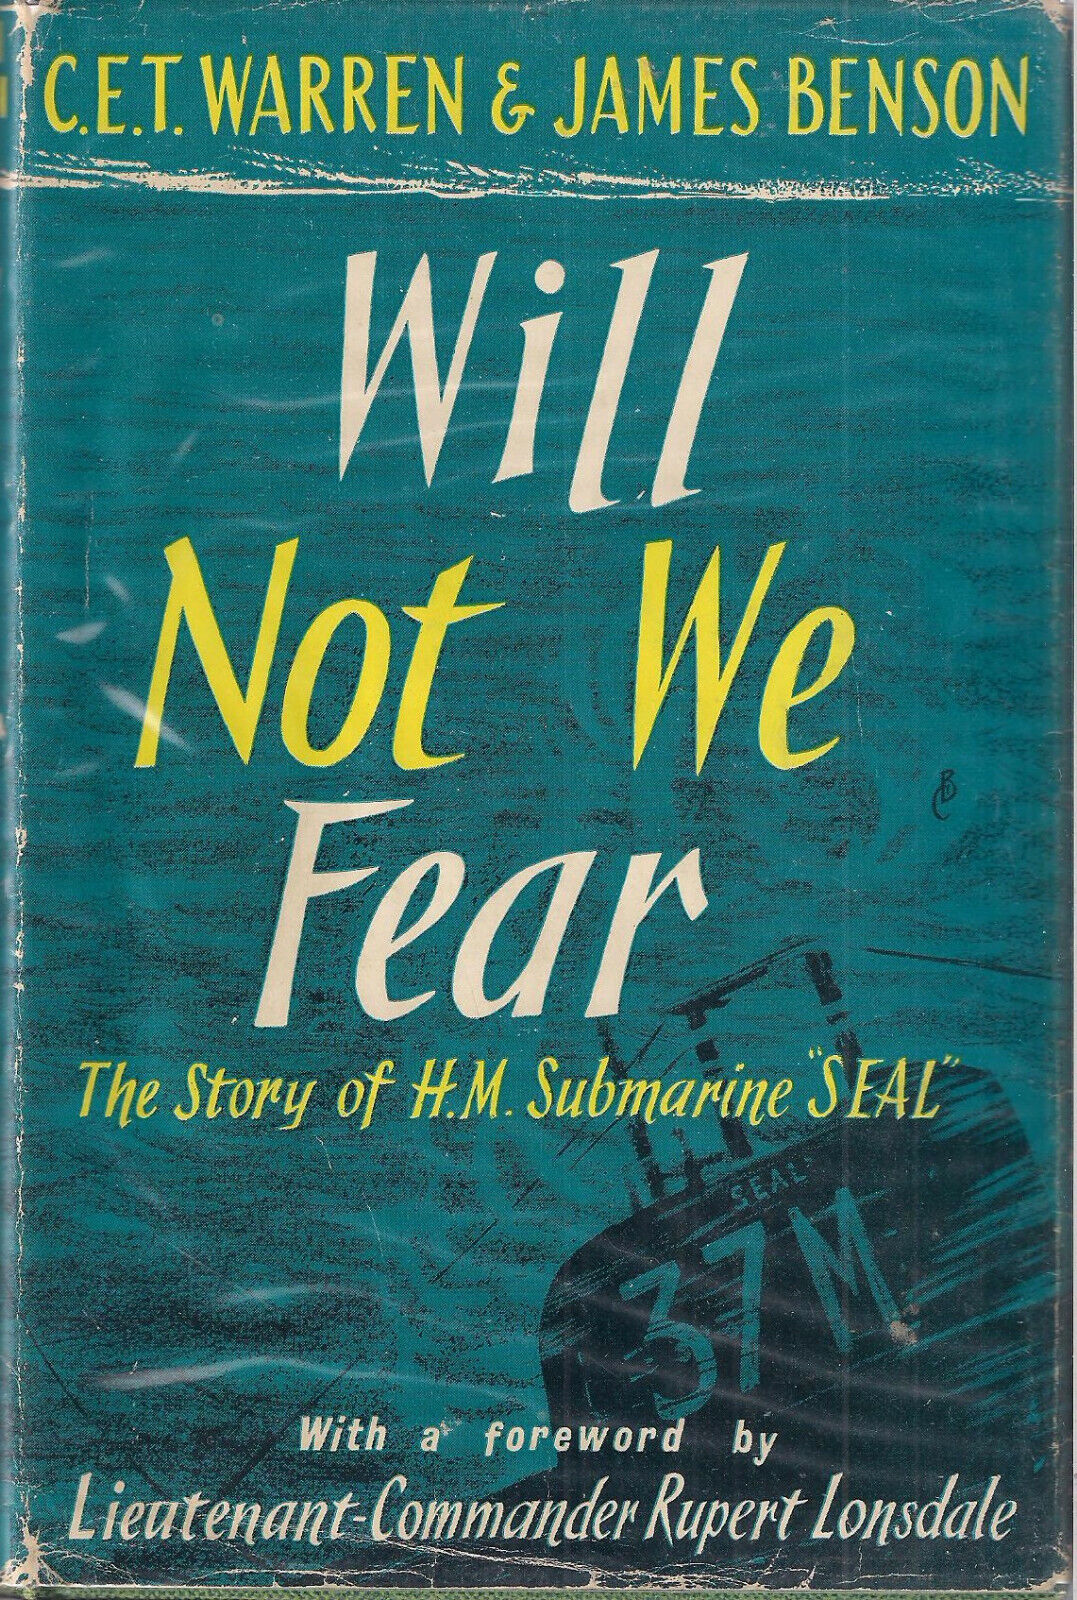 Will Not We Fear: The Story of H.M.Submarine Seal by C.E.T  Warren and J. Benson